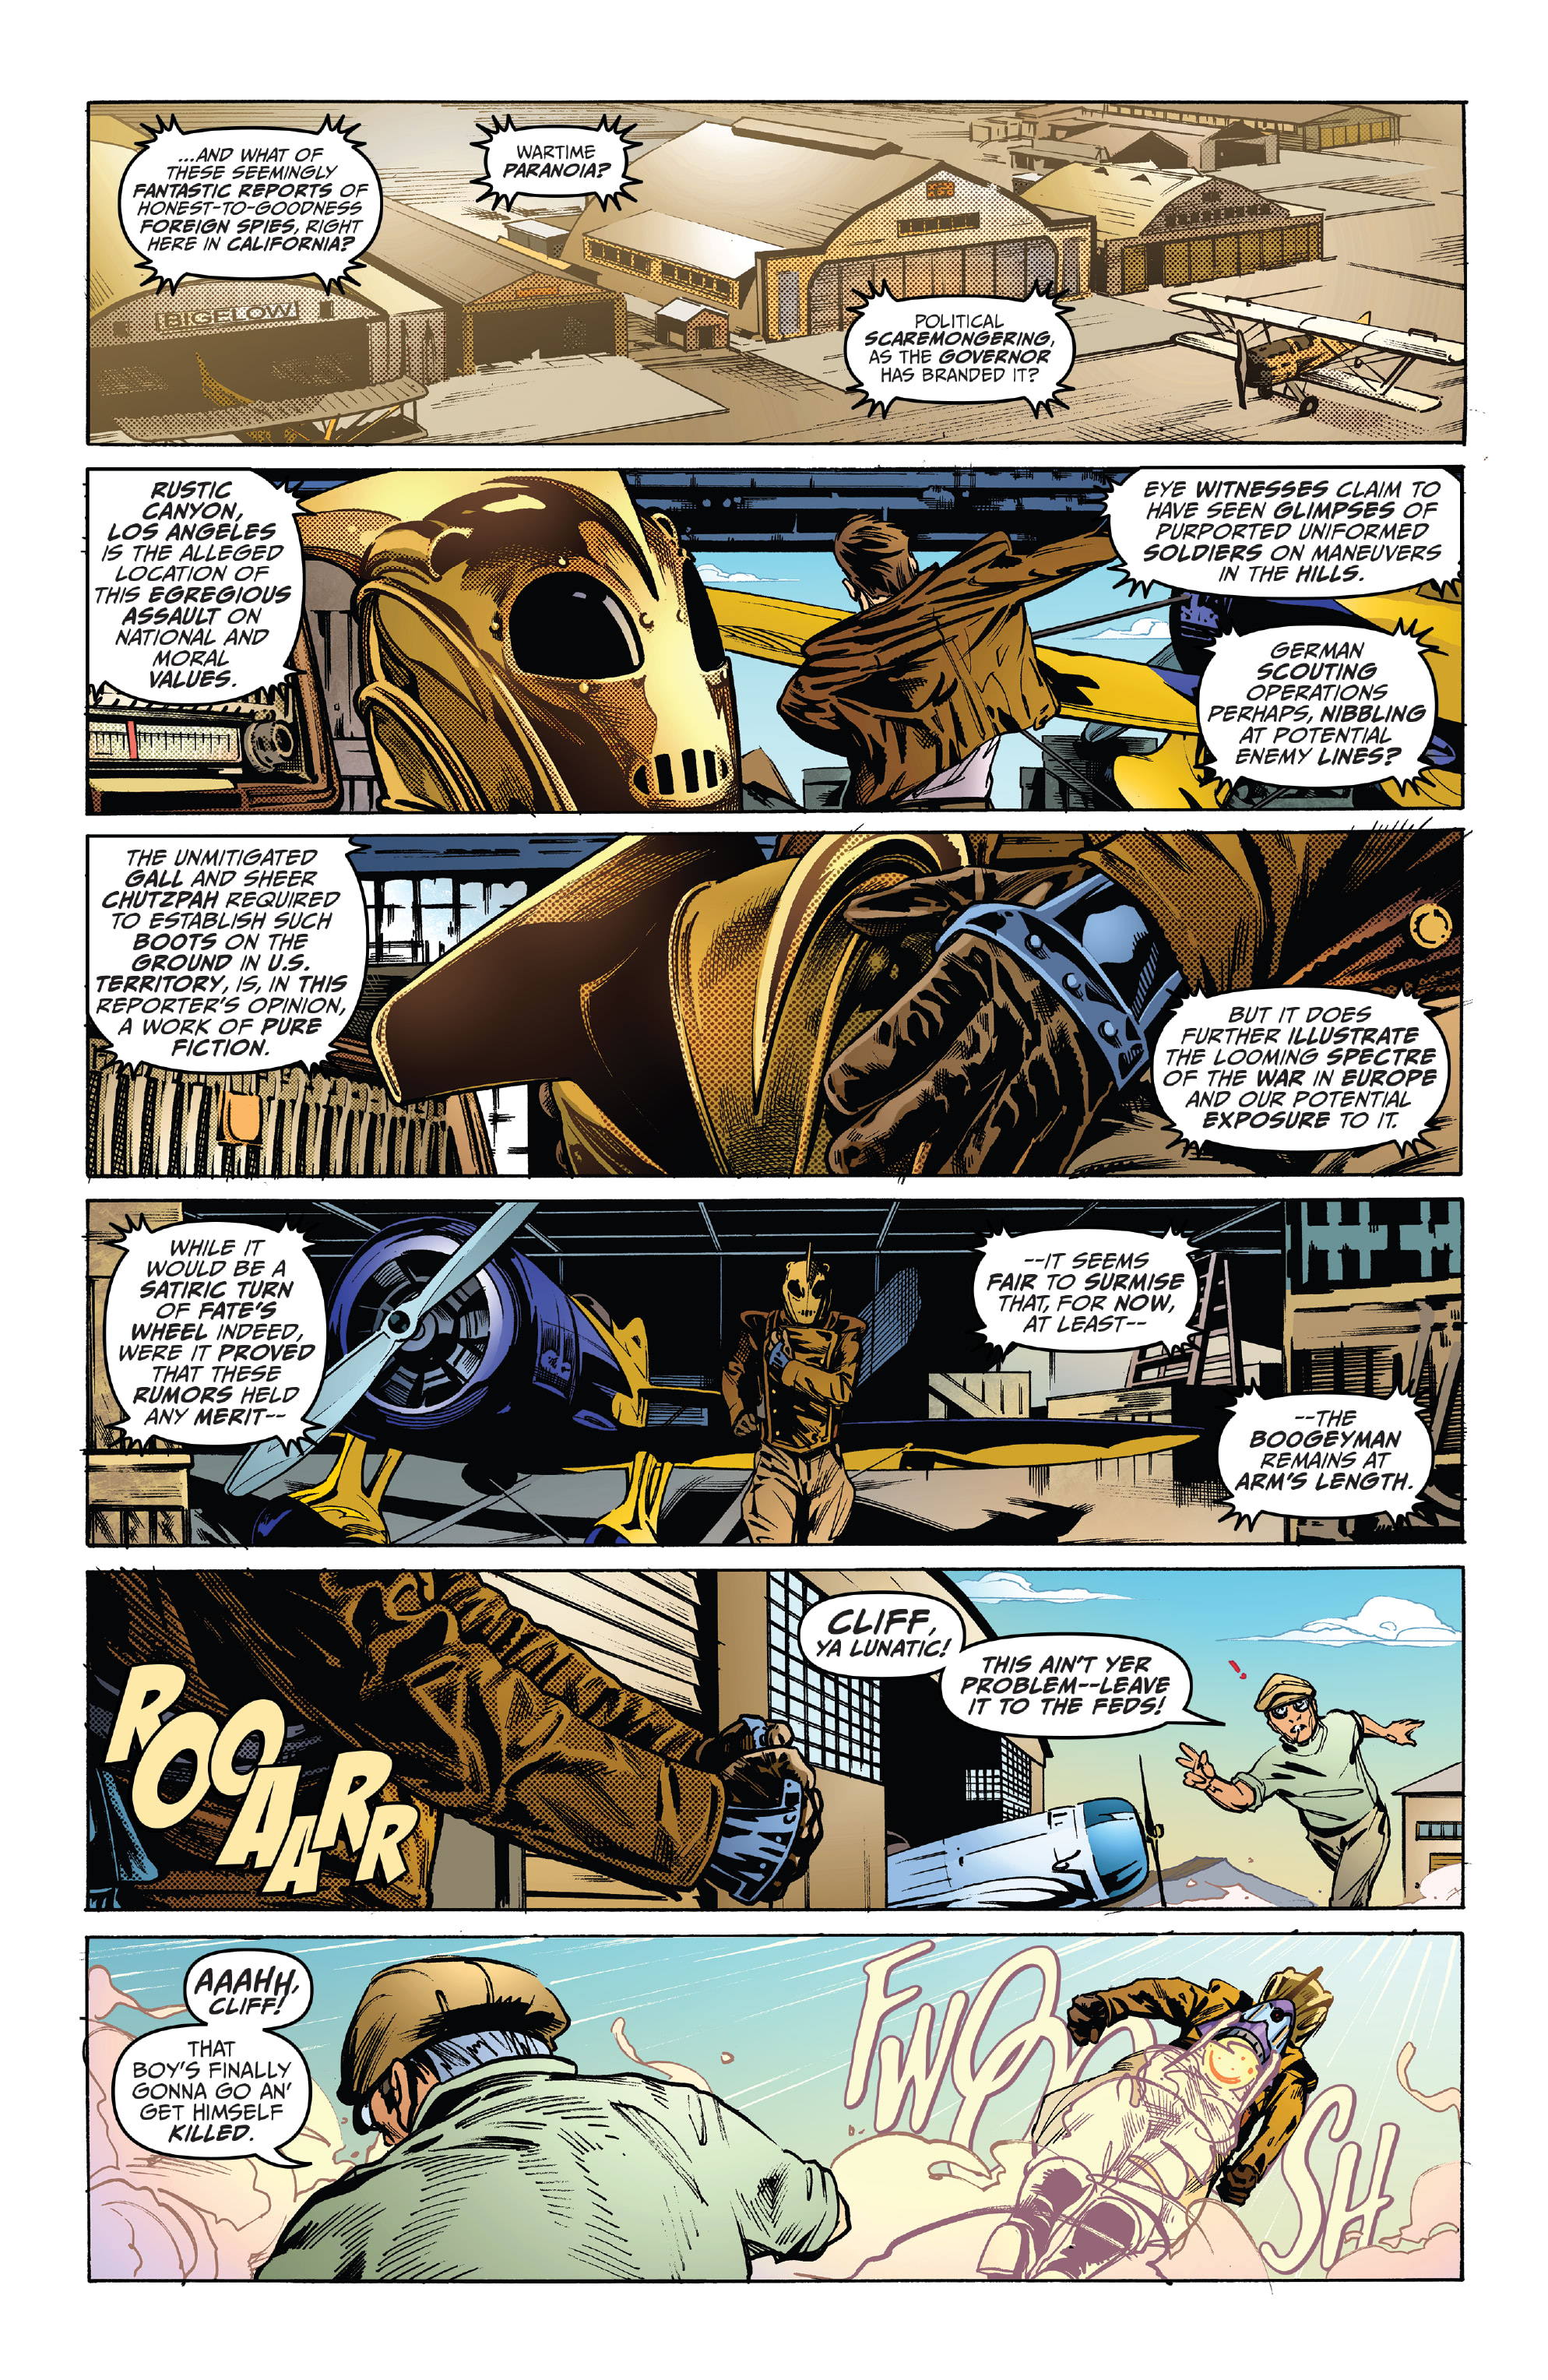 The Rocketeer: The Great Race (2022-): Chapter 1 - Page 3